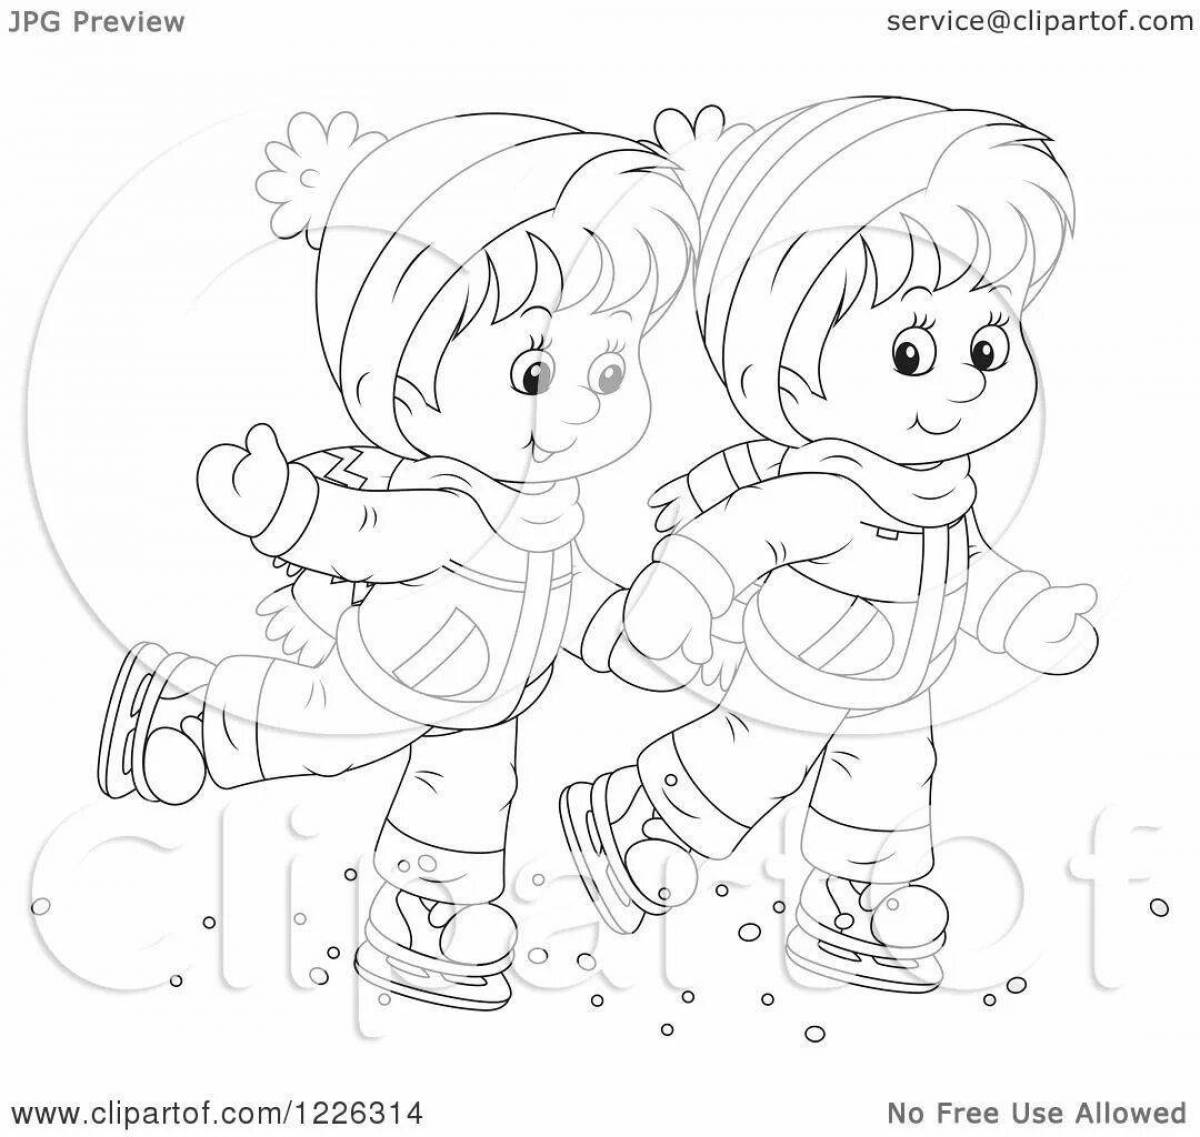 Exciting ice rink coloring book